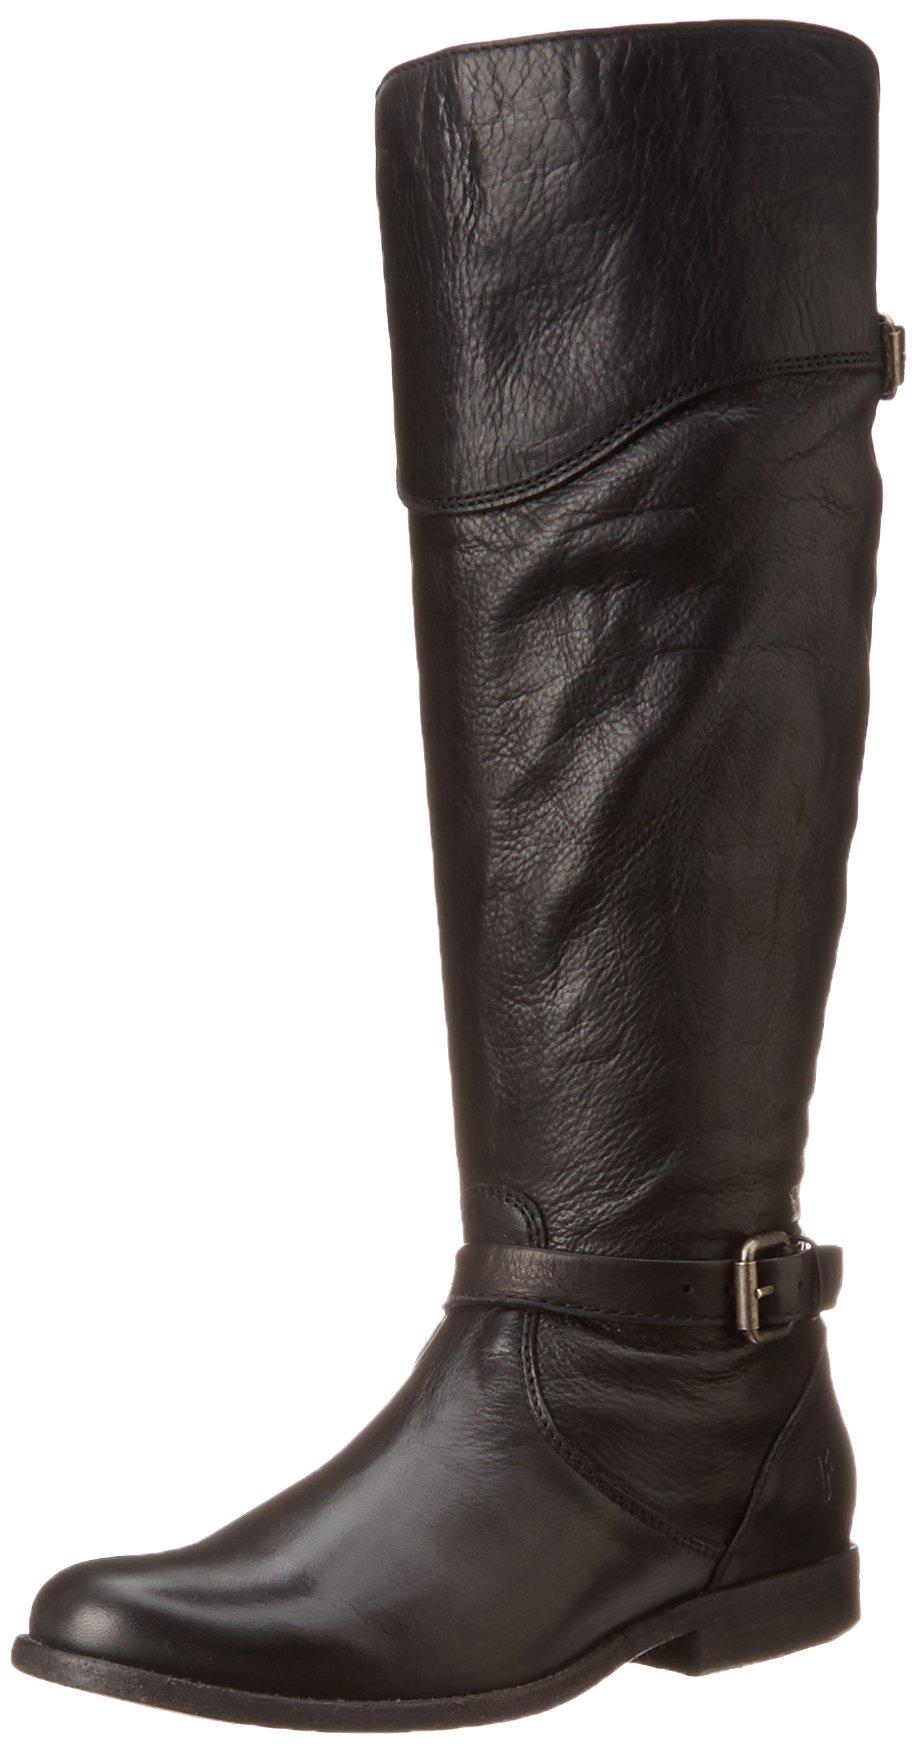 Frye Leather Phillip Riding Boot,black Extended,7 M Us - Save 30% - Lyst